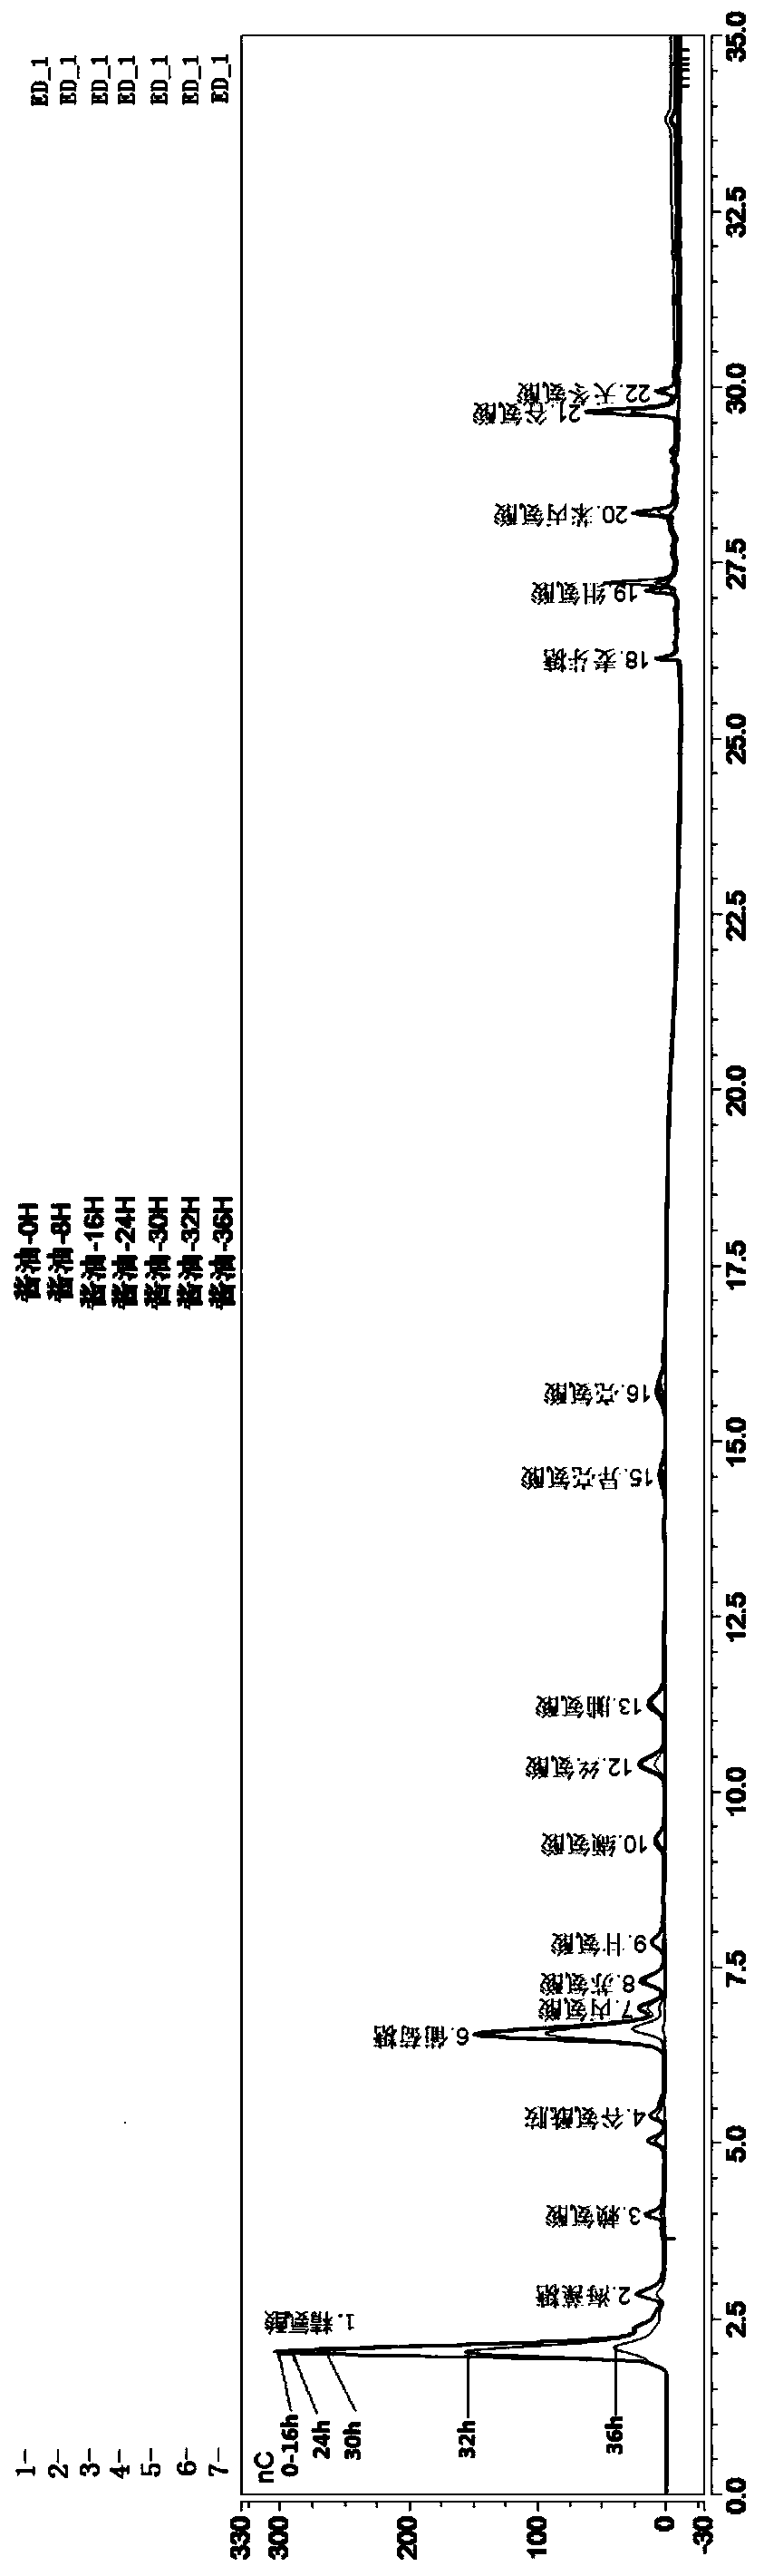 Method for rapidly determining a plurality of amino acids and sugars in soy sauce at the same time